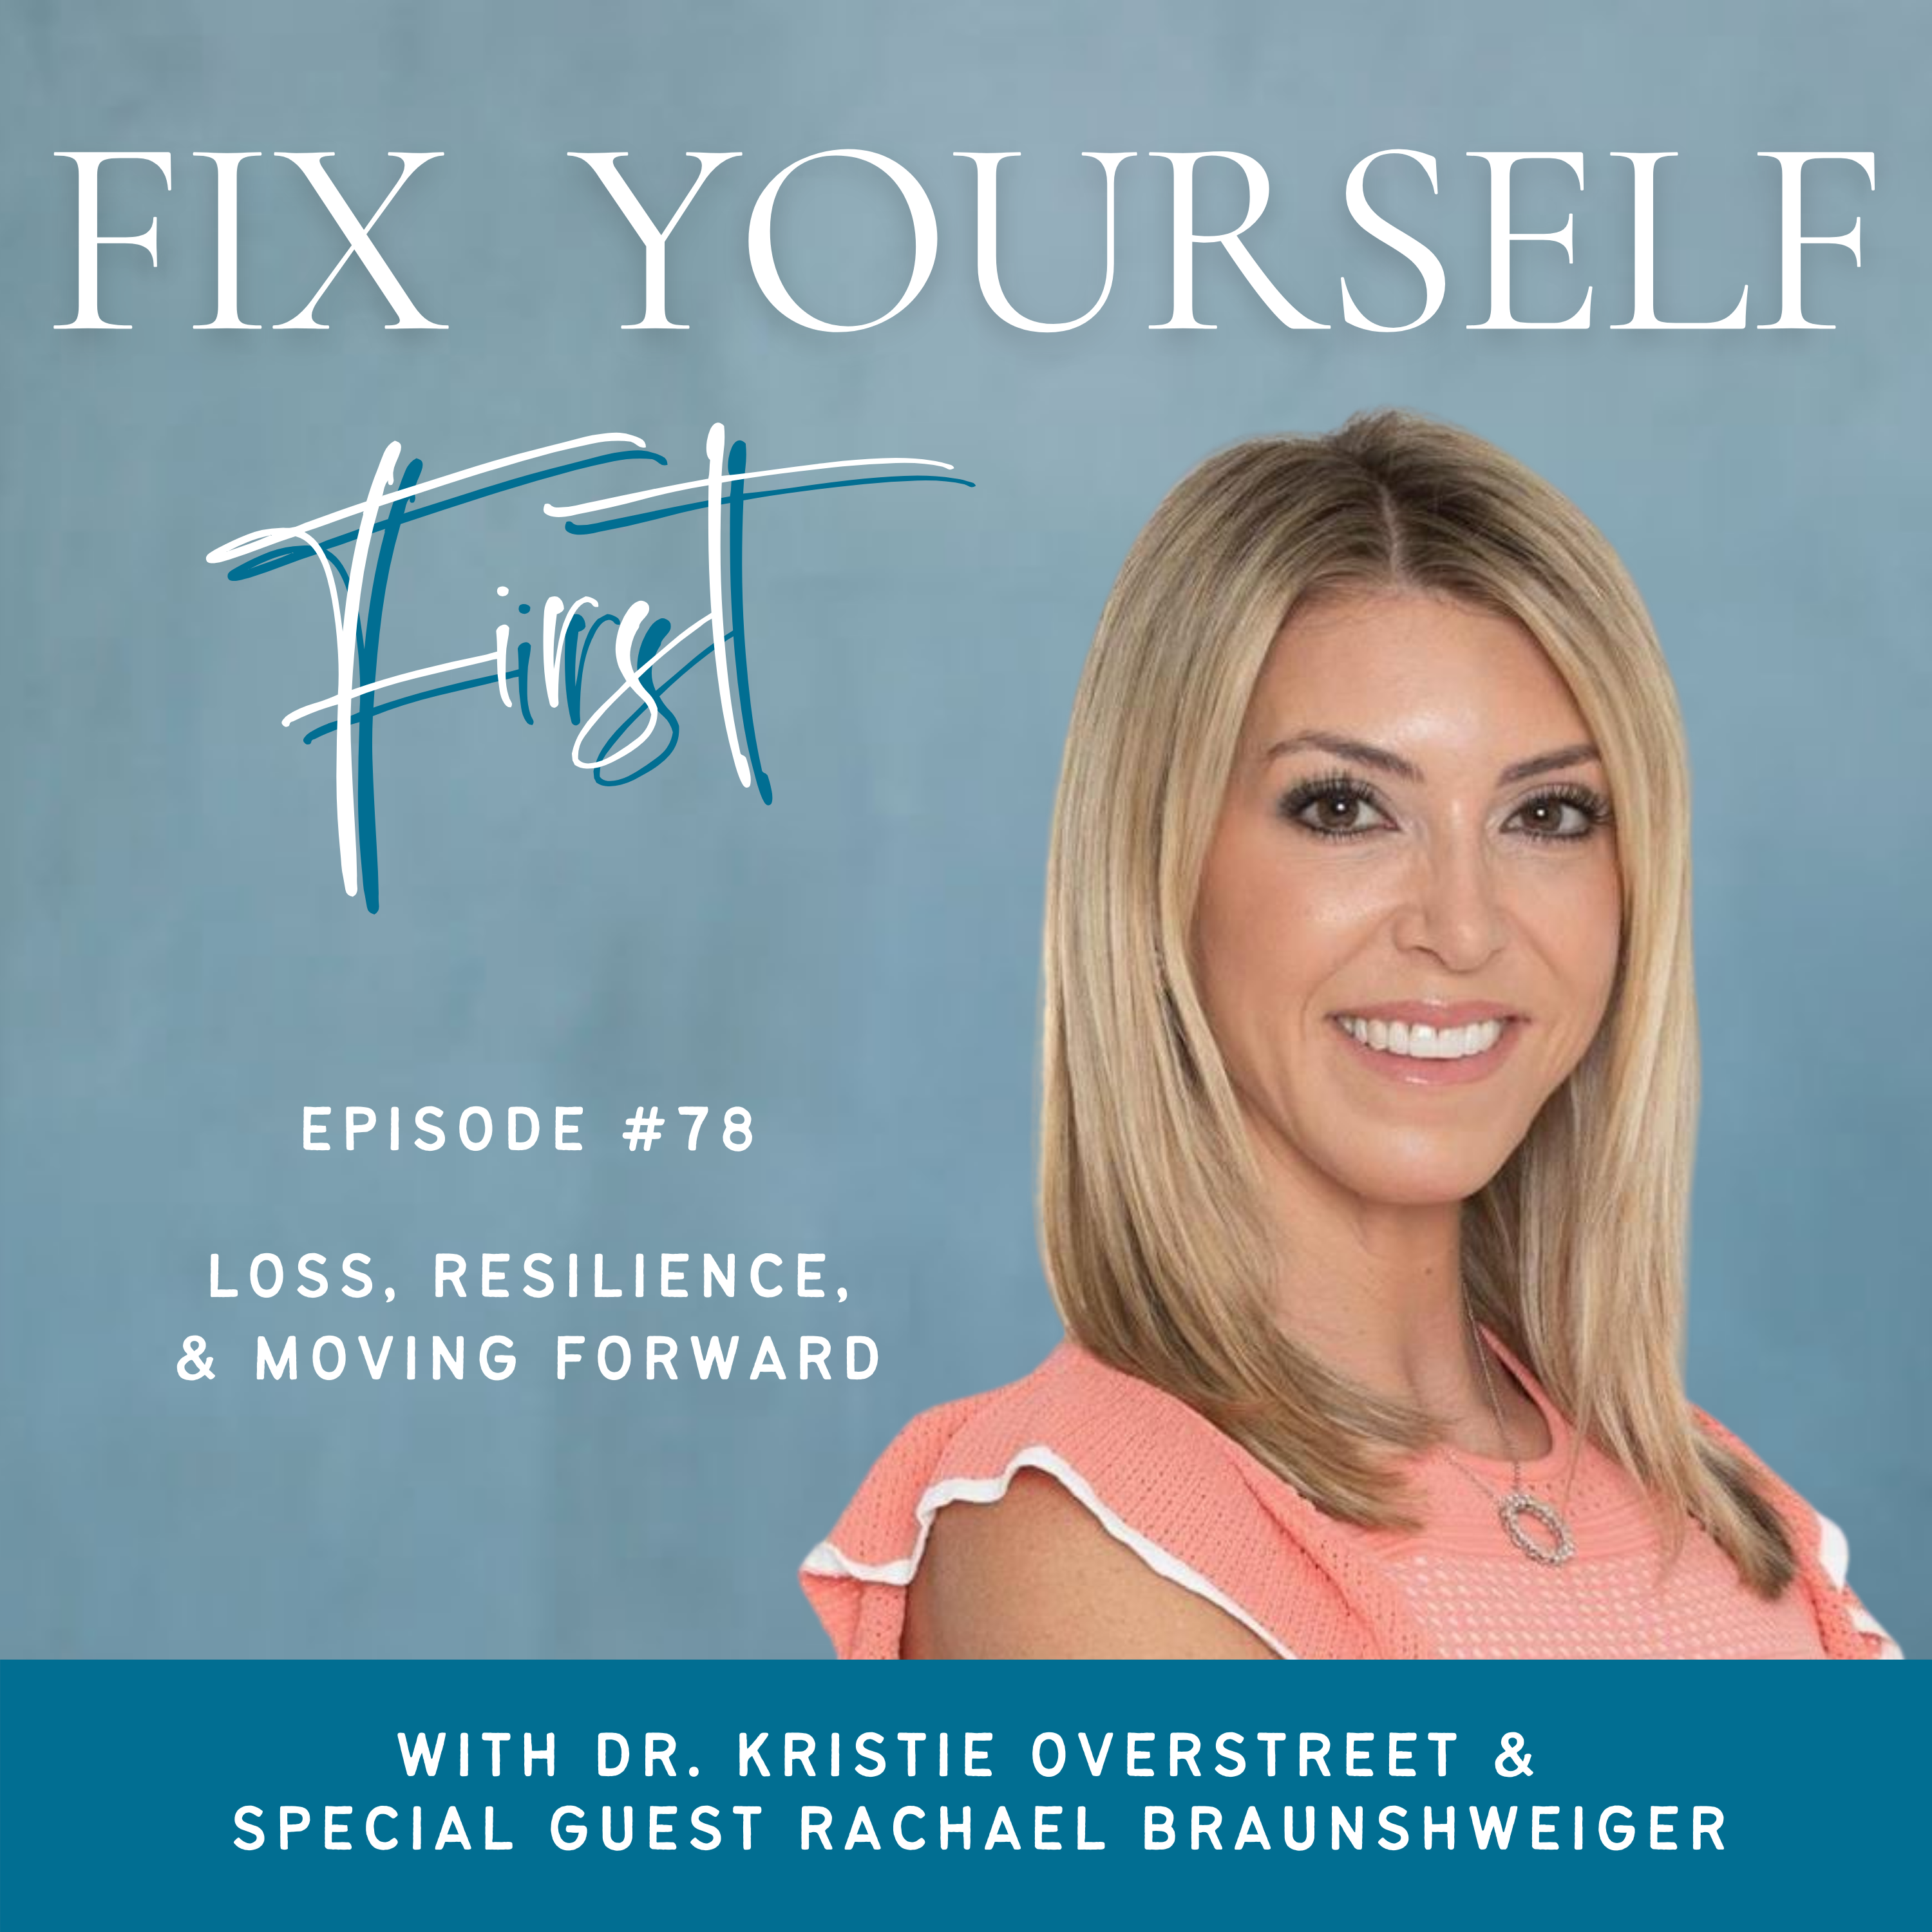 Fix Yourself First - Episode 78